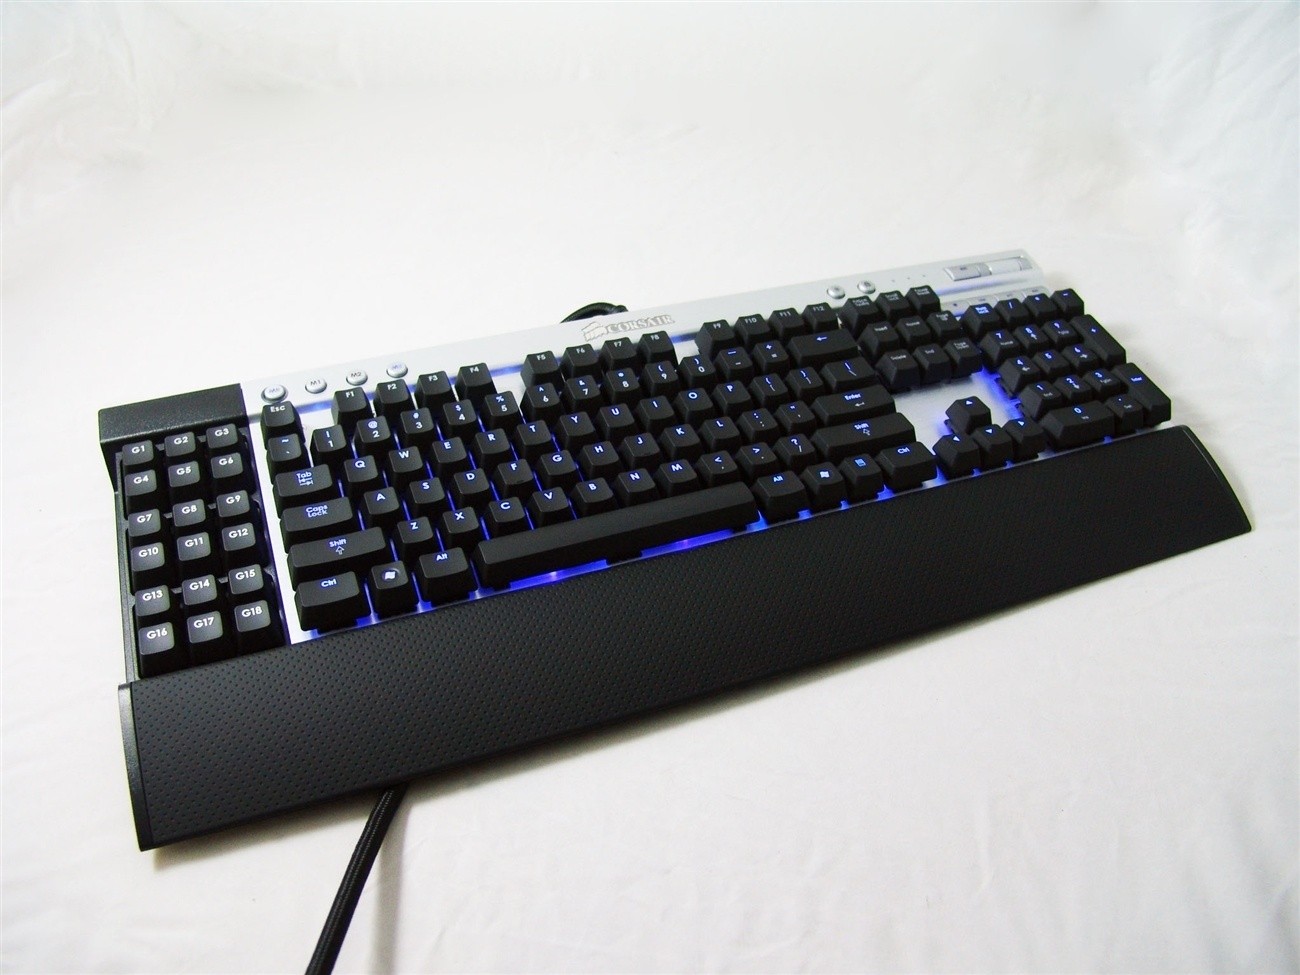 coping Seaport inch Corsair Vengeance K90 Performance MMO Mechanical Gaming Keyboard Review